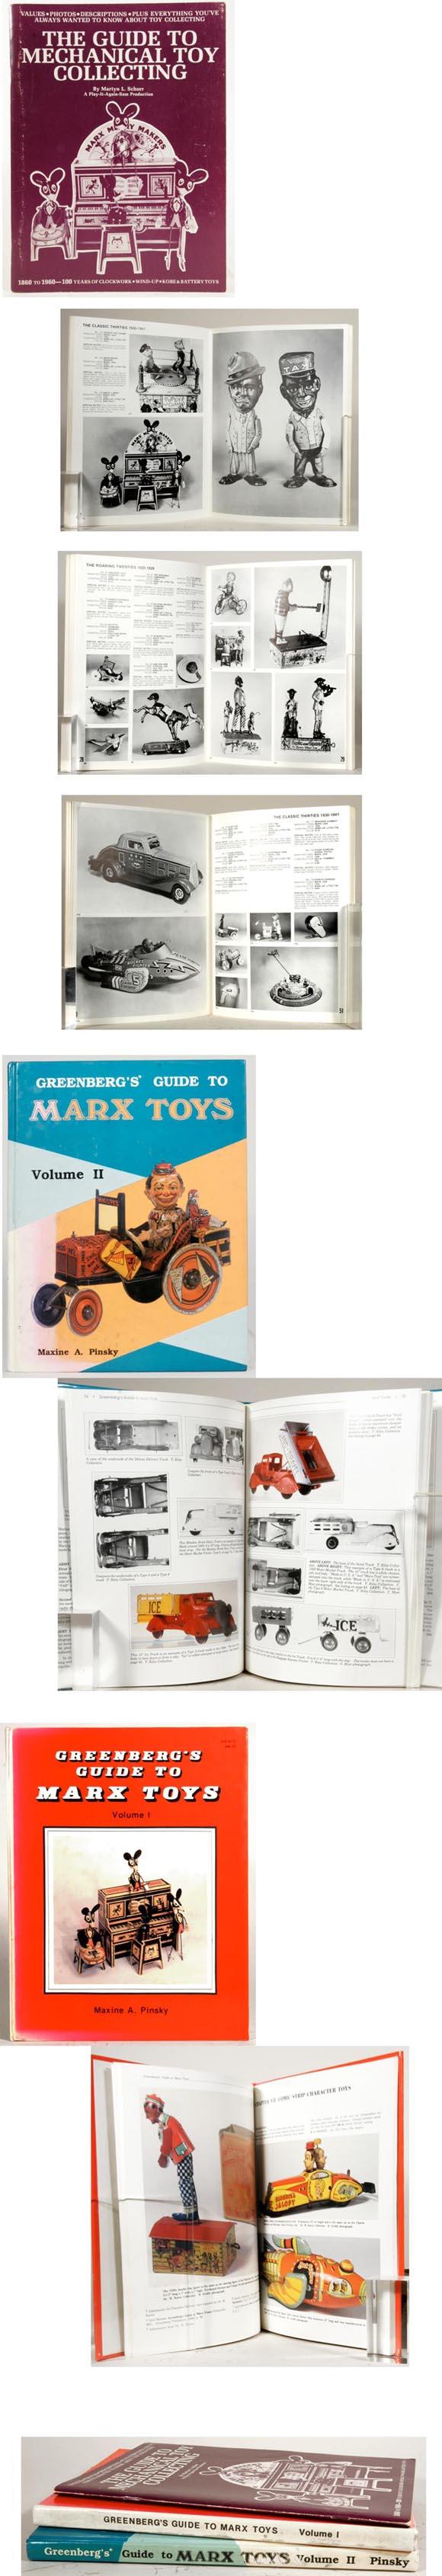 Three Mechanical Toy Collecting Books